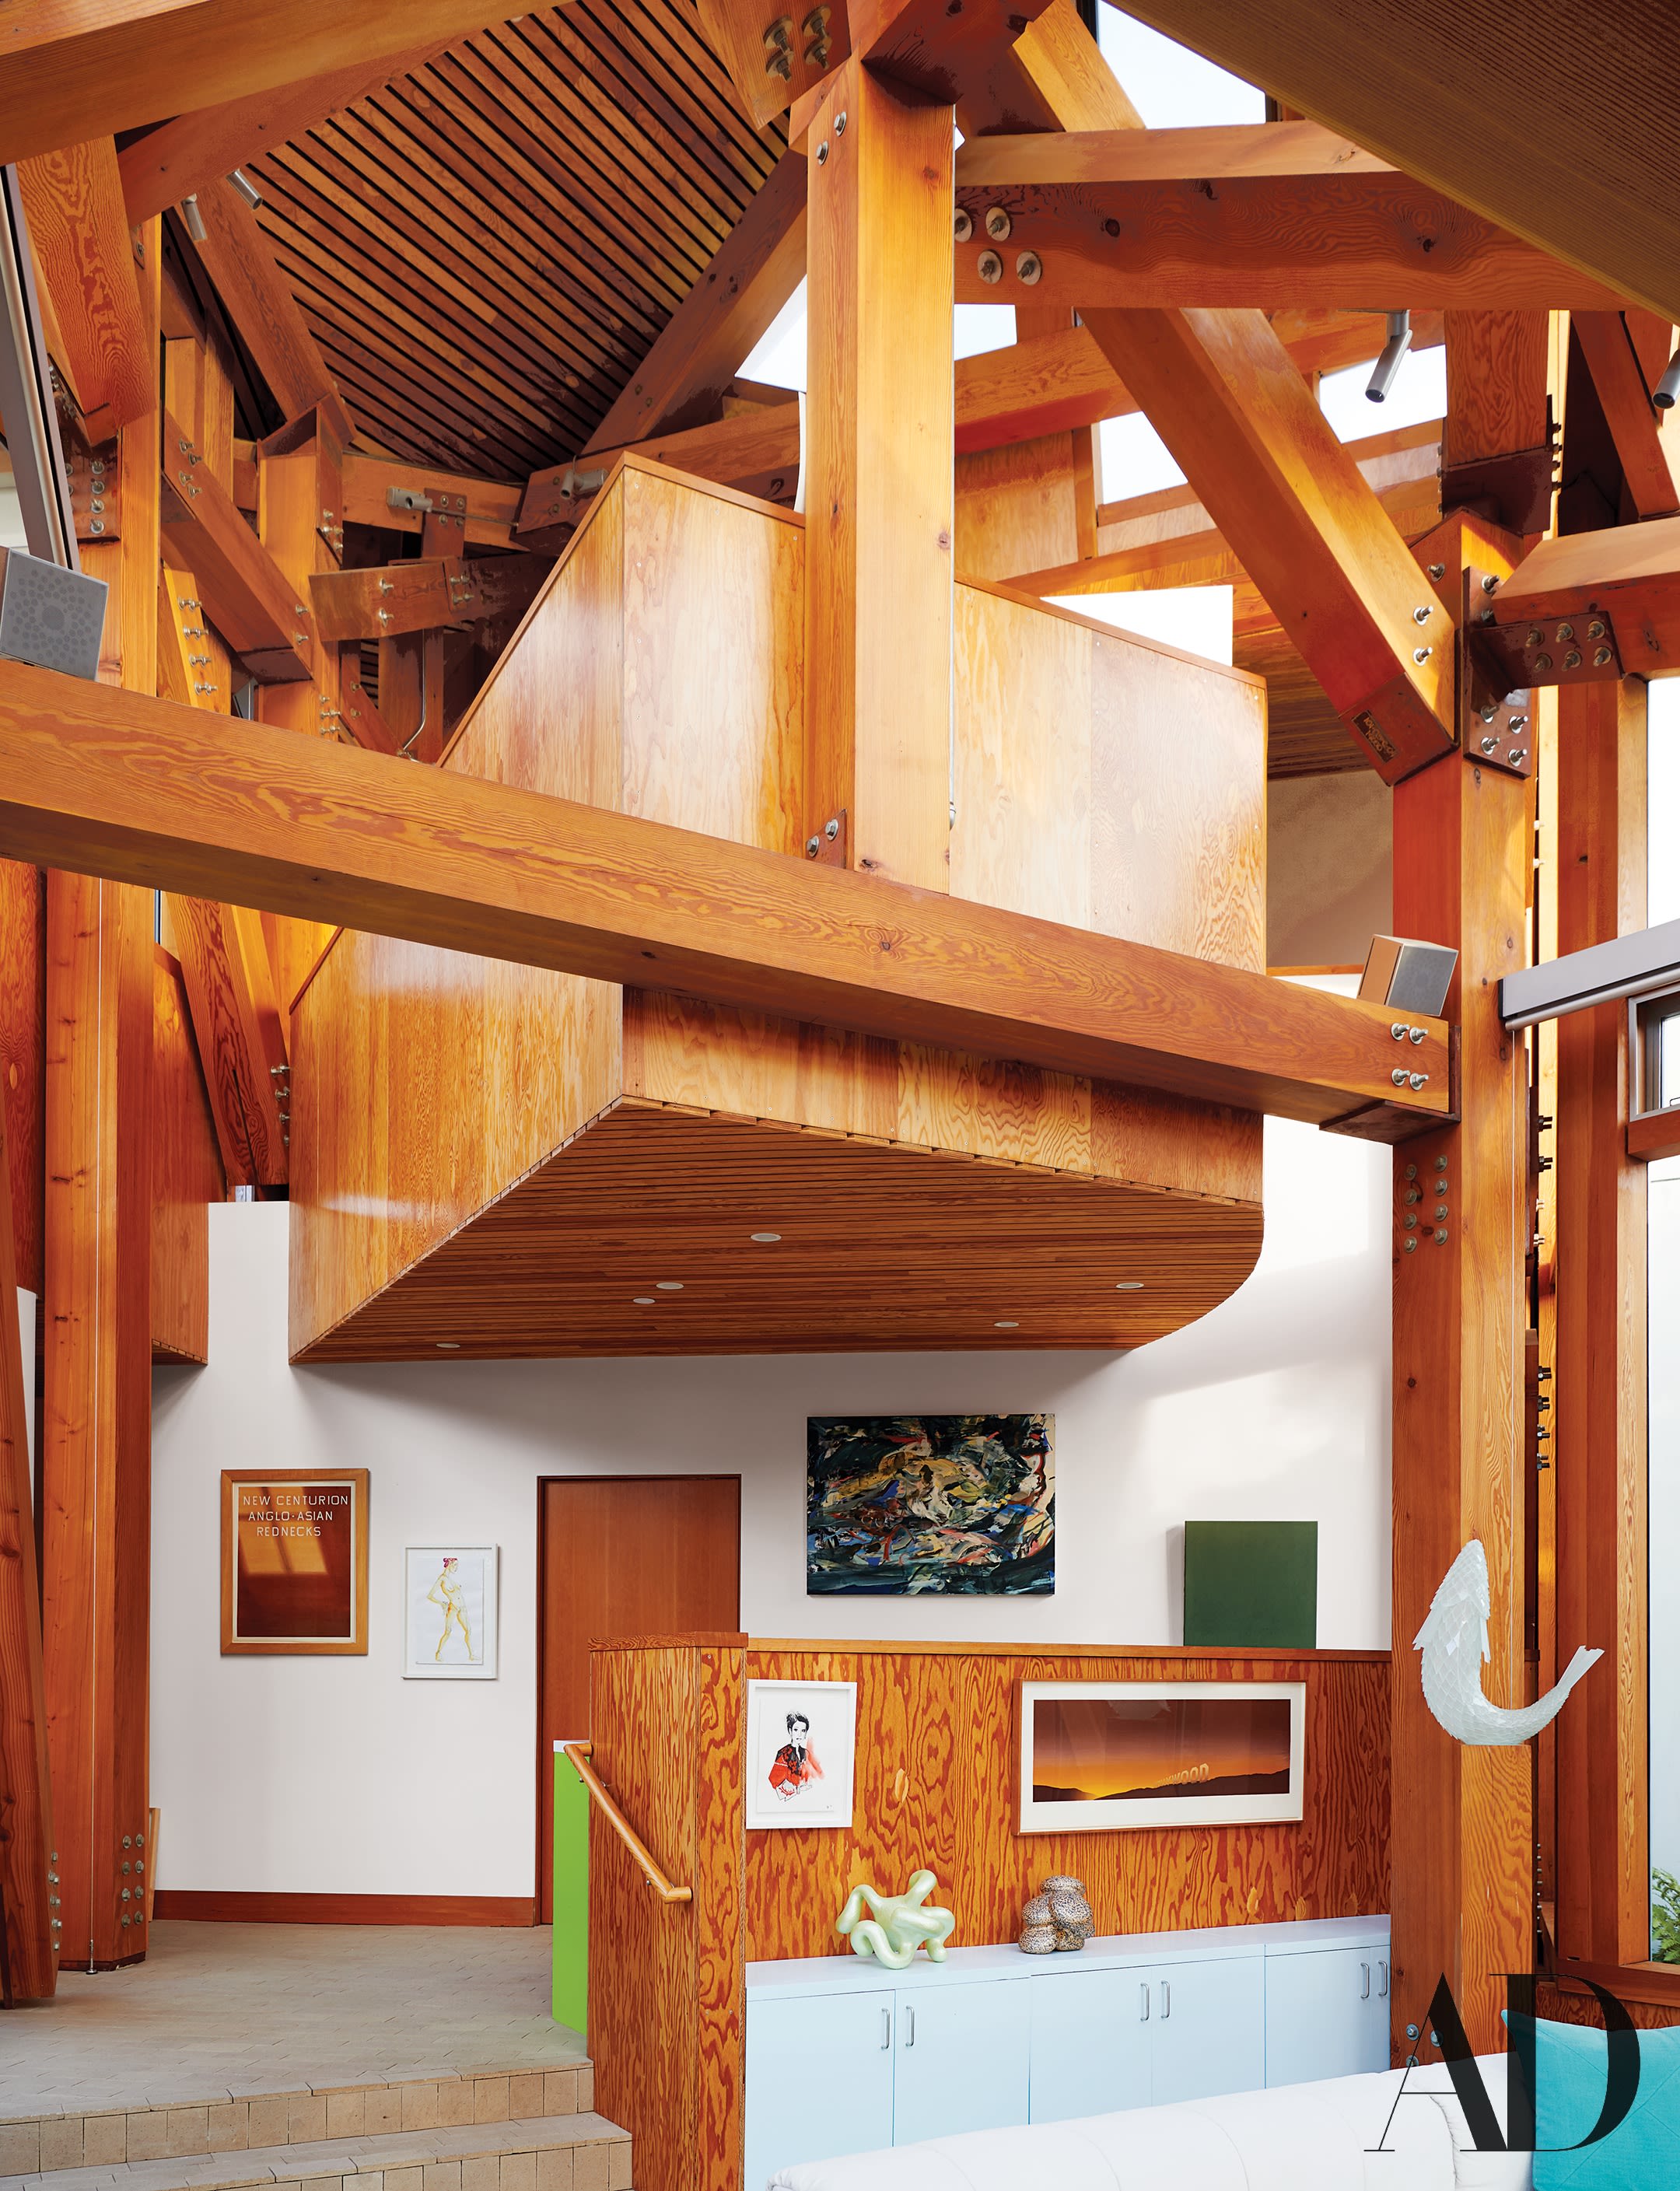 frank gehry  architecture and interior design news and projects